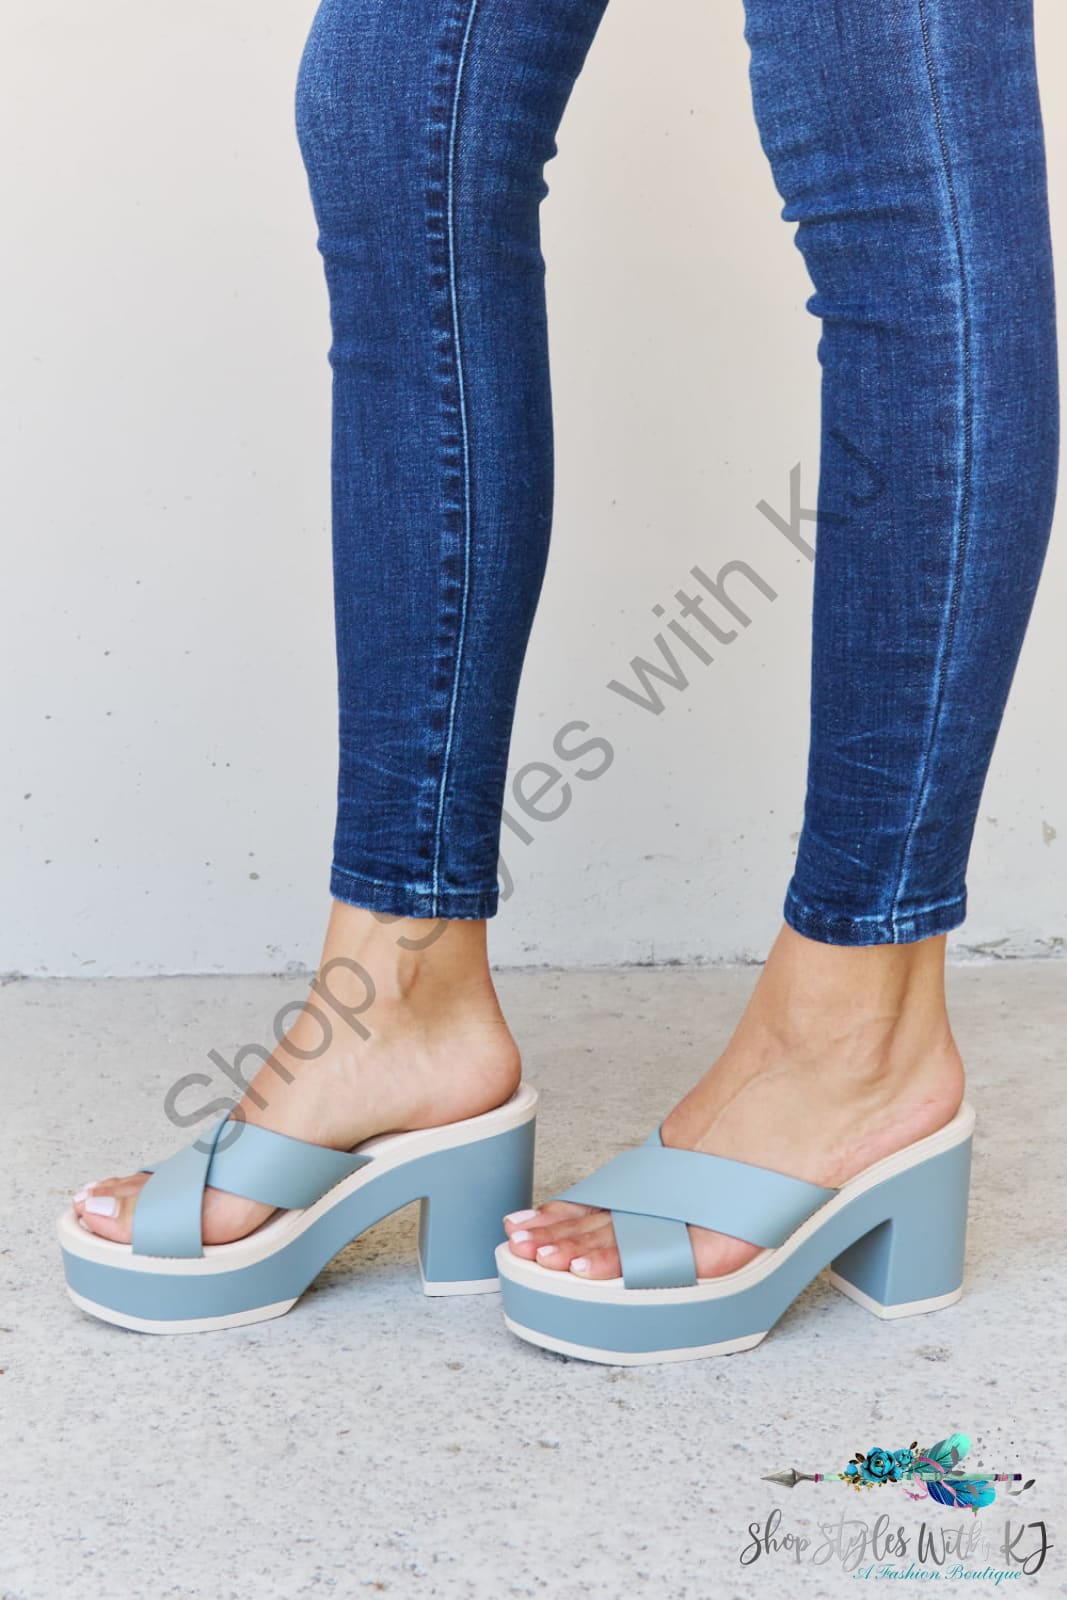 Weeboo Cherish The Moments Contrast Platform Sandals In Misty Blue